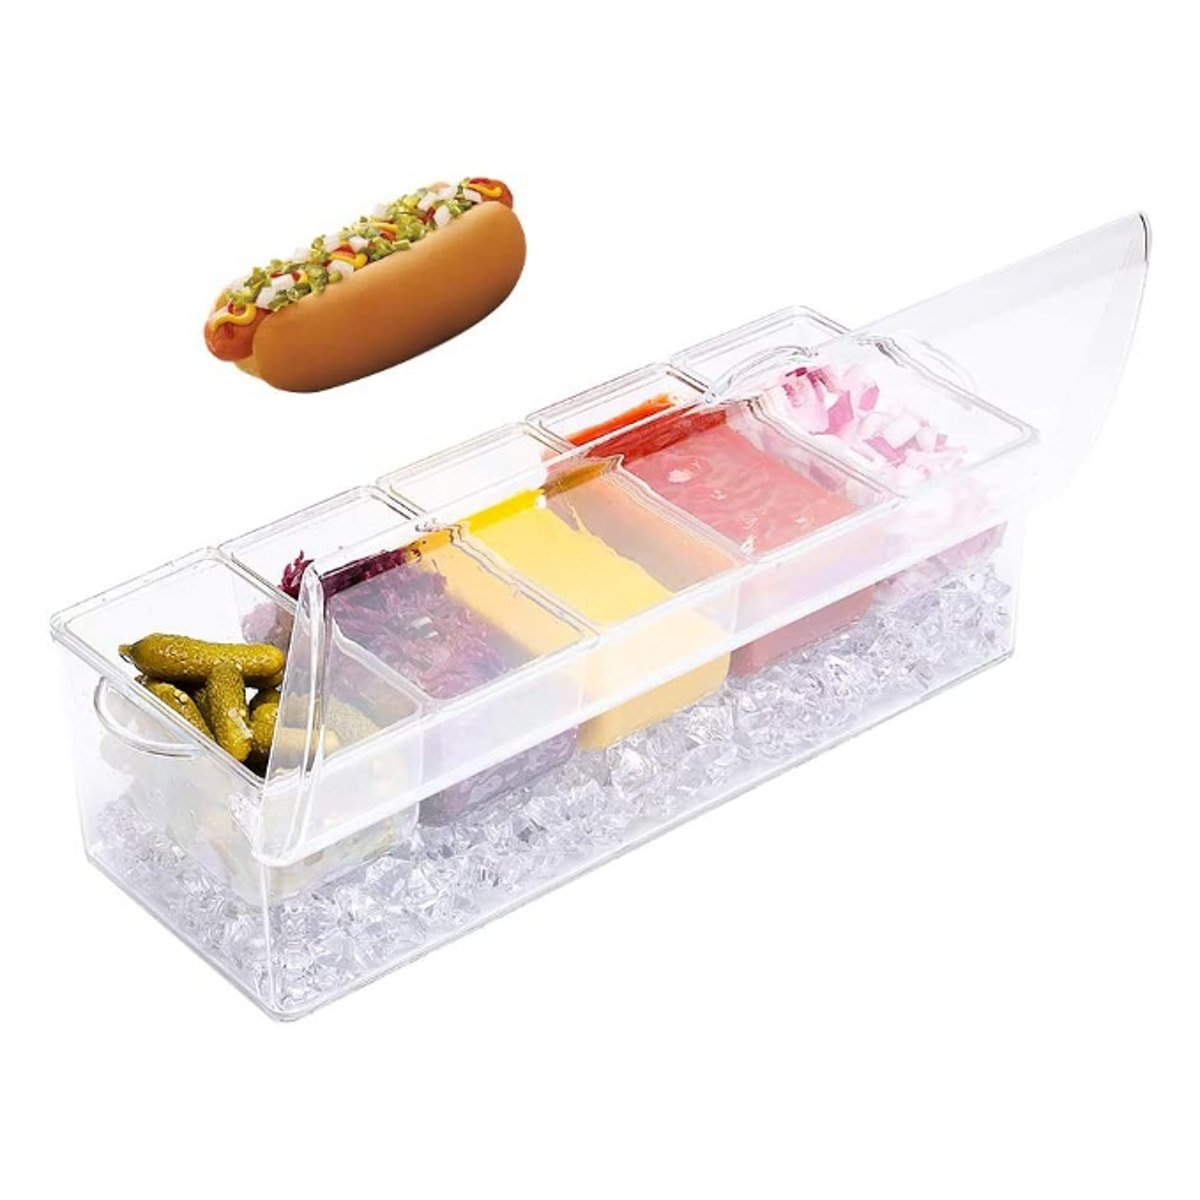 A plastic rectangular container that has multiple compartments filled with condiments and a layer of ice underneath next to a hot dog.